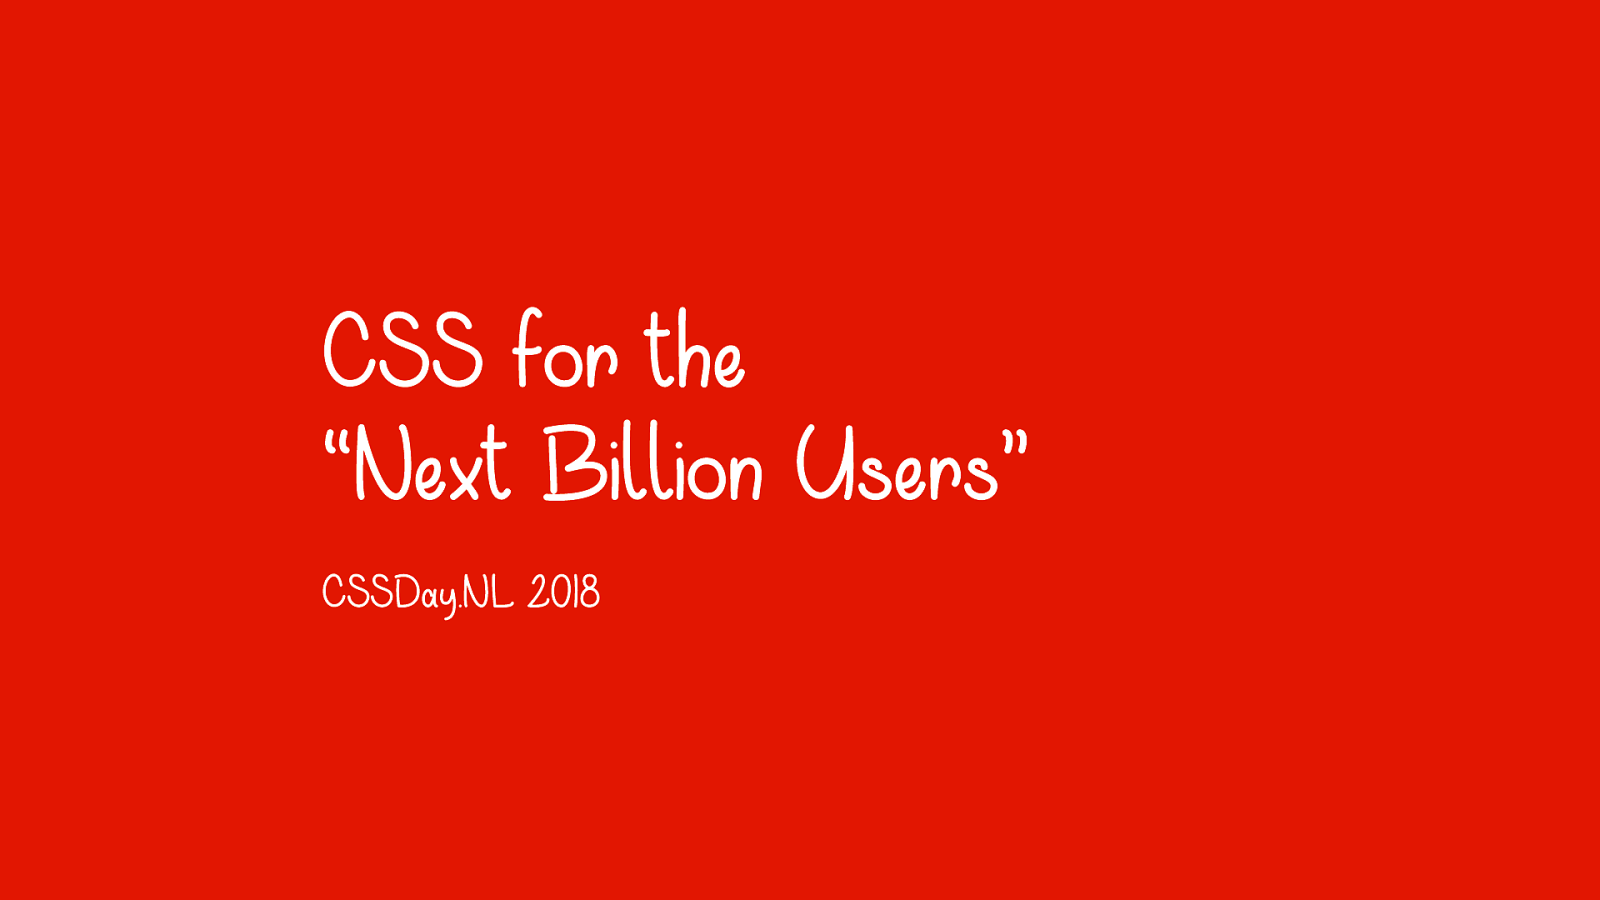 CSS for the “Next Billion Users”